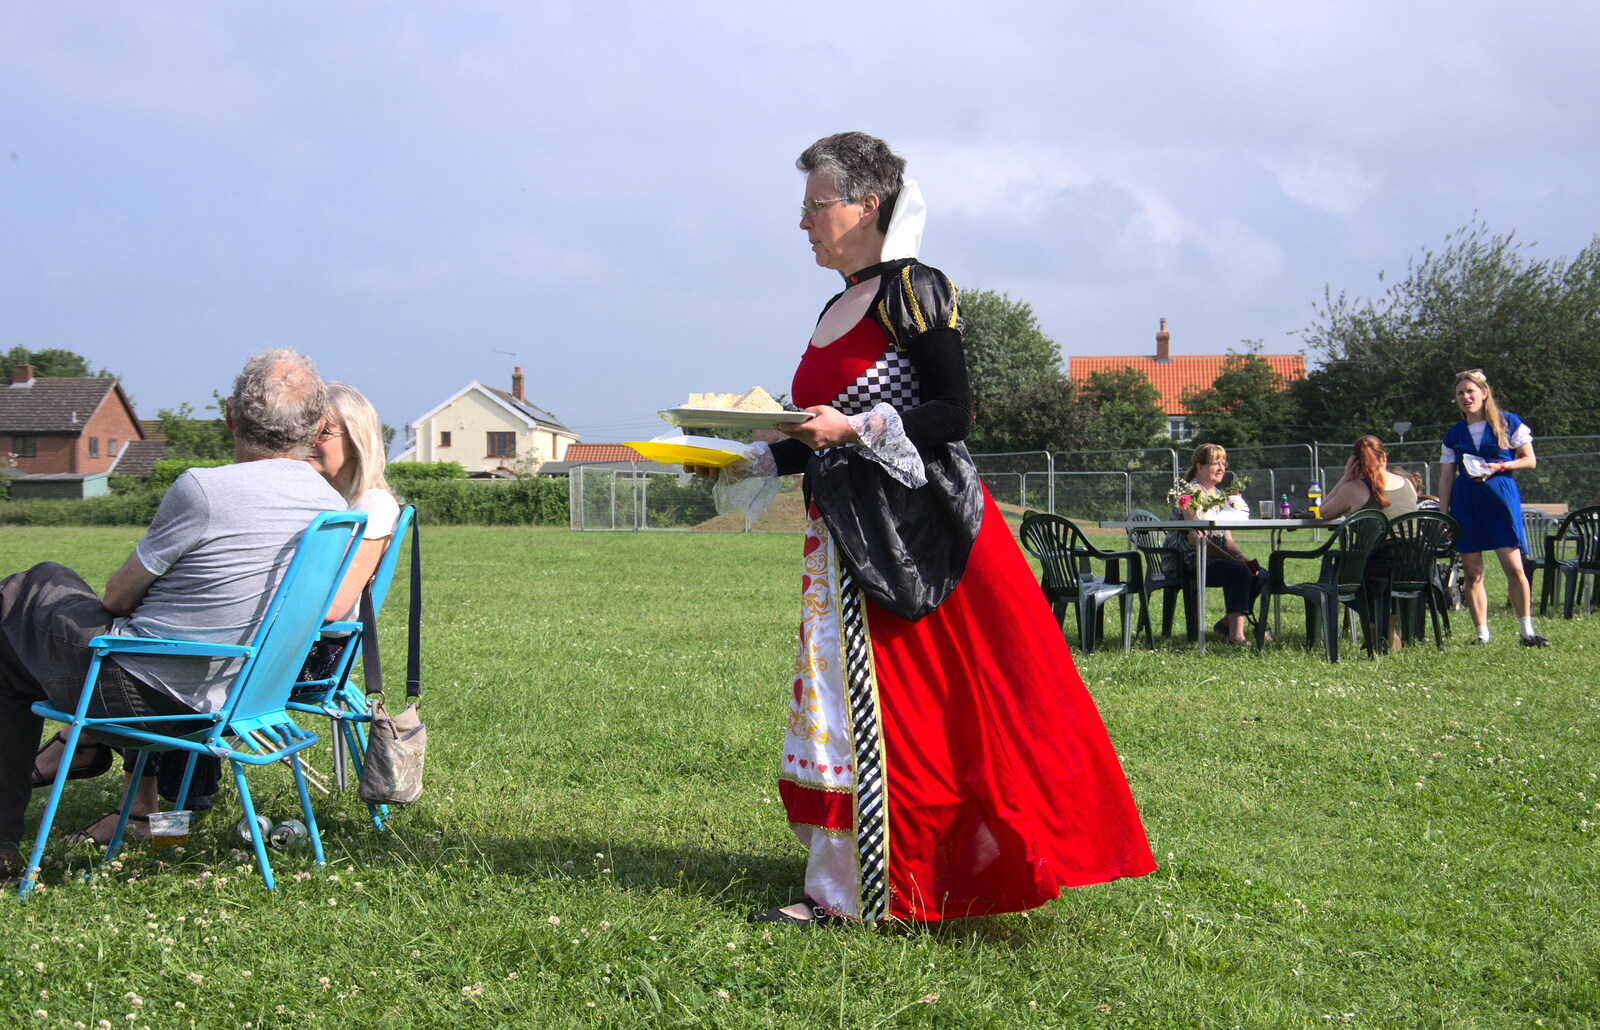 The Queen of Hearts from The Not-Opening of the Palgrave Playground, Palgrave, Suffolk - 3rd June 2018